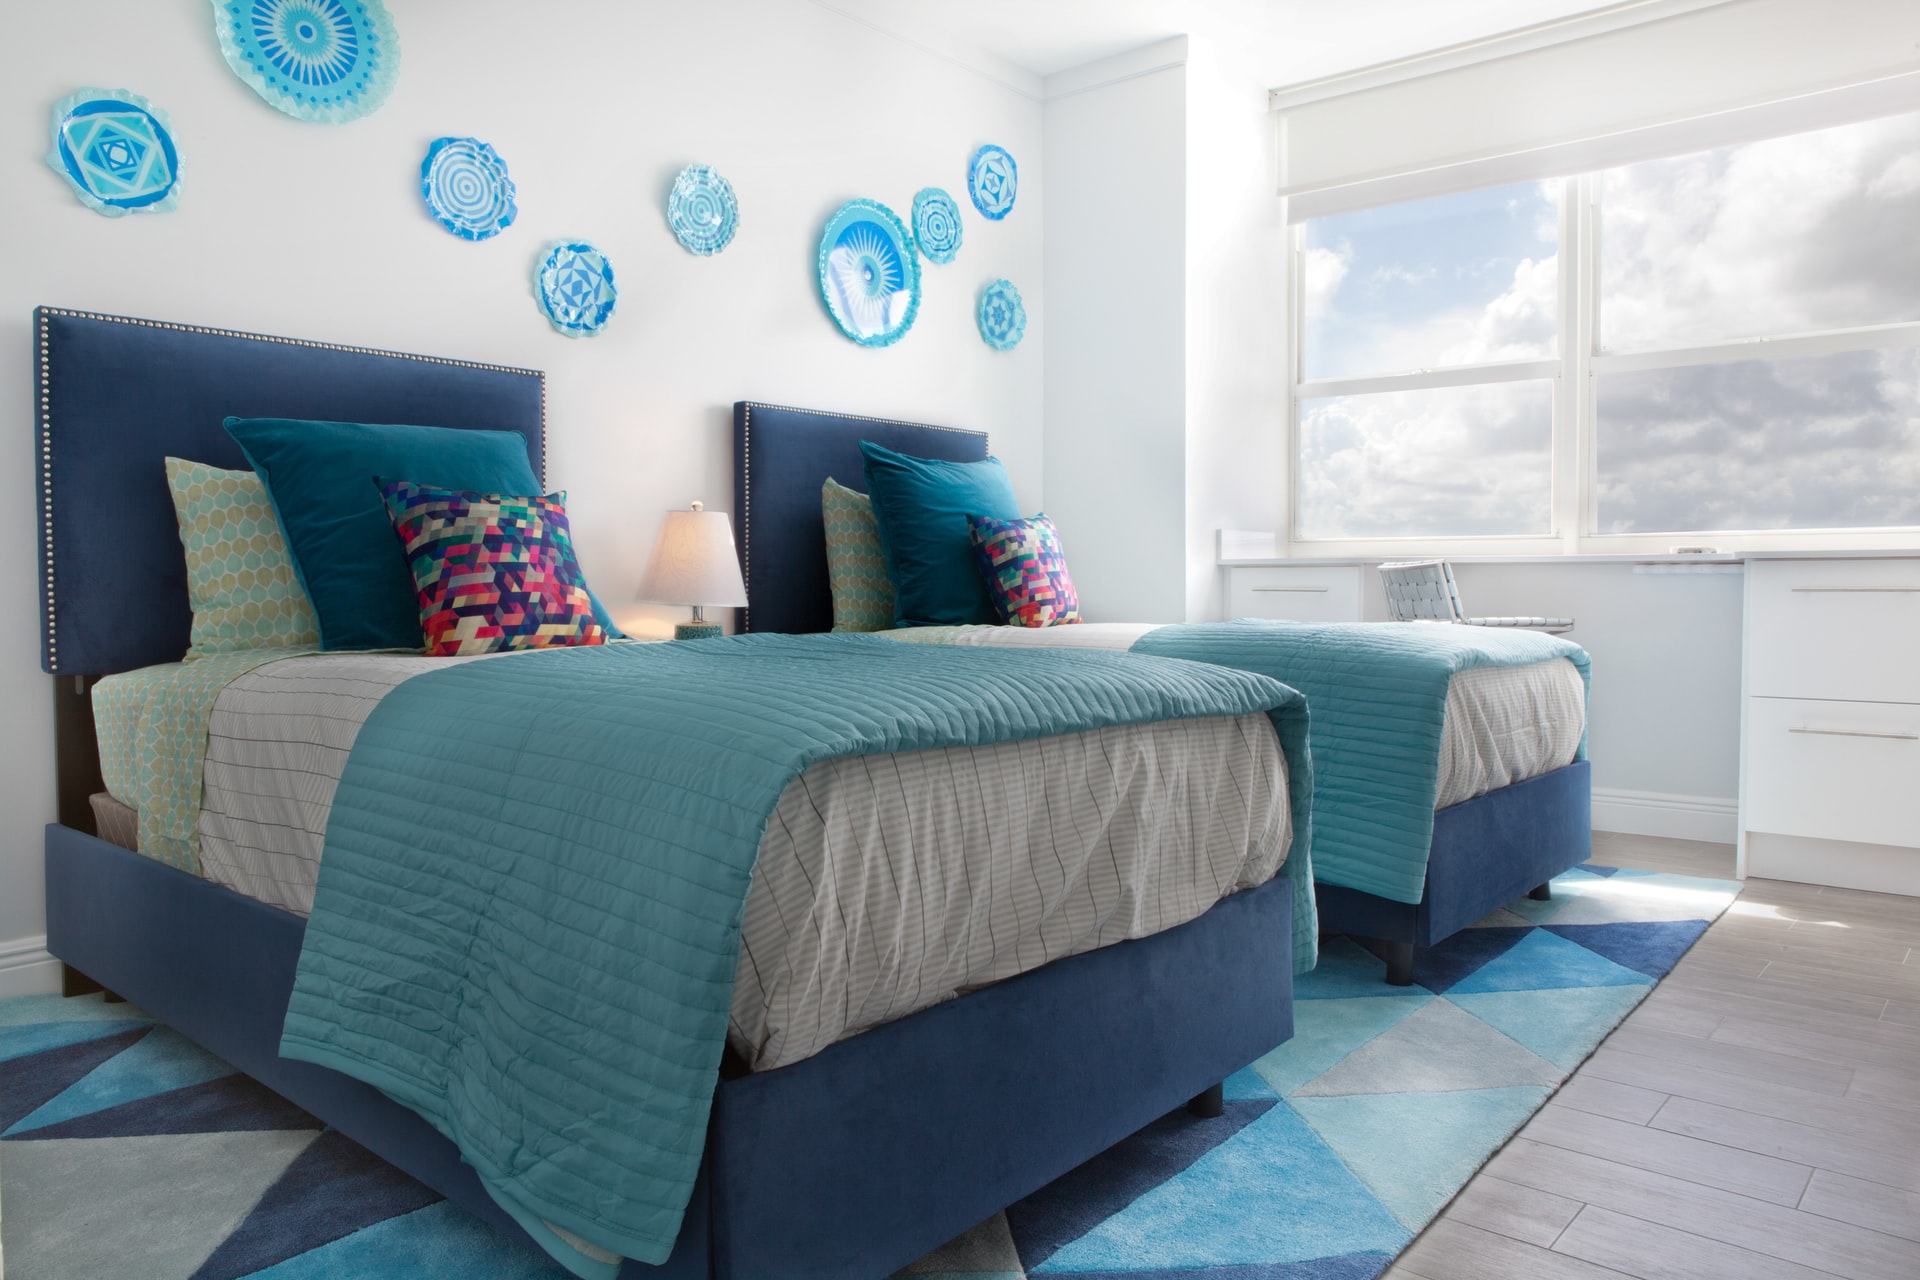 A holiday home bedroom with twin beds and blue plates on the wall as decor